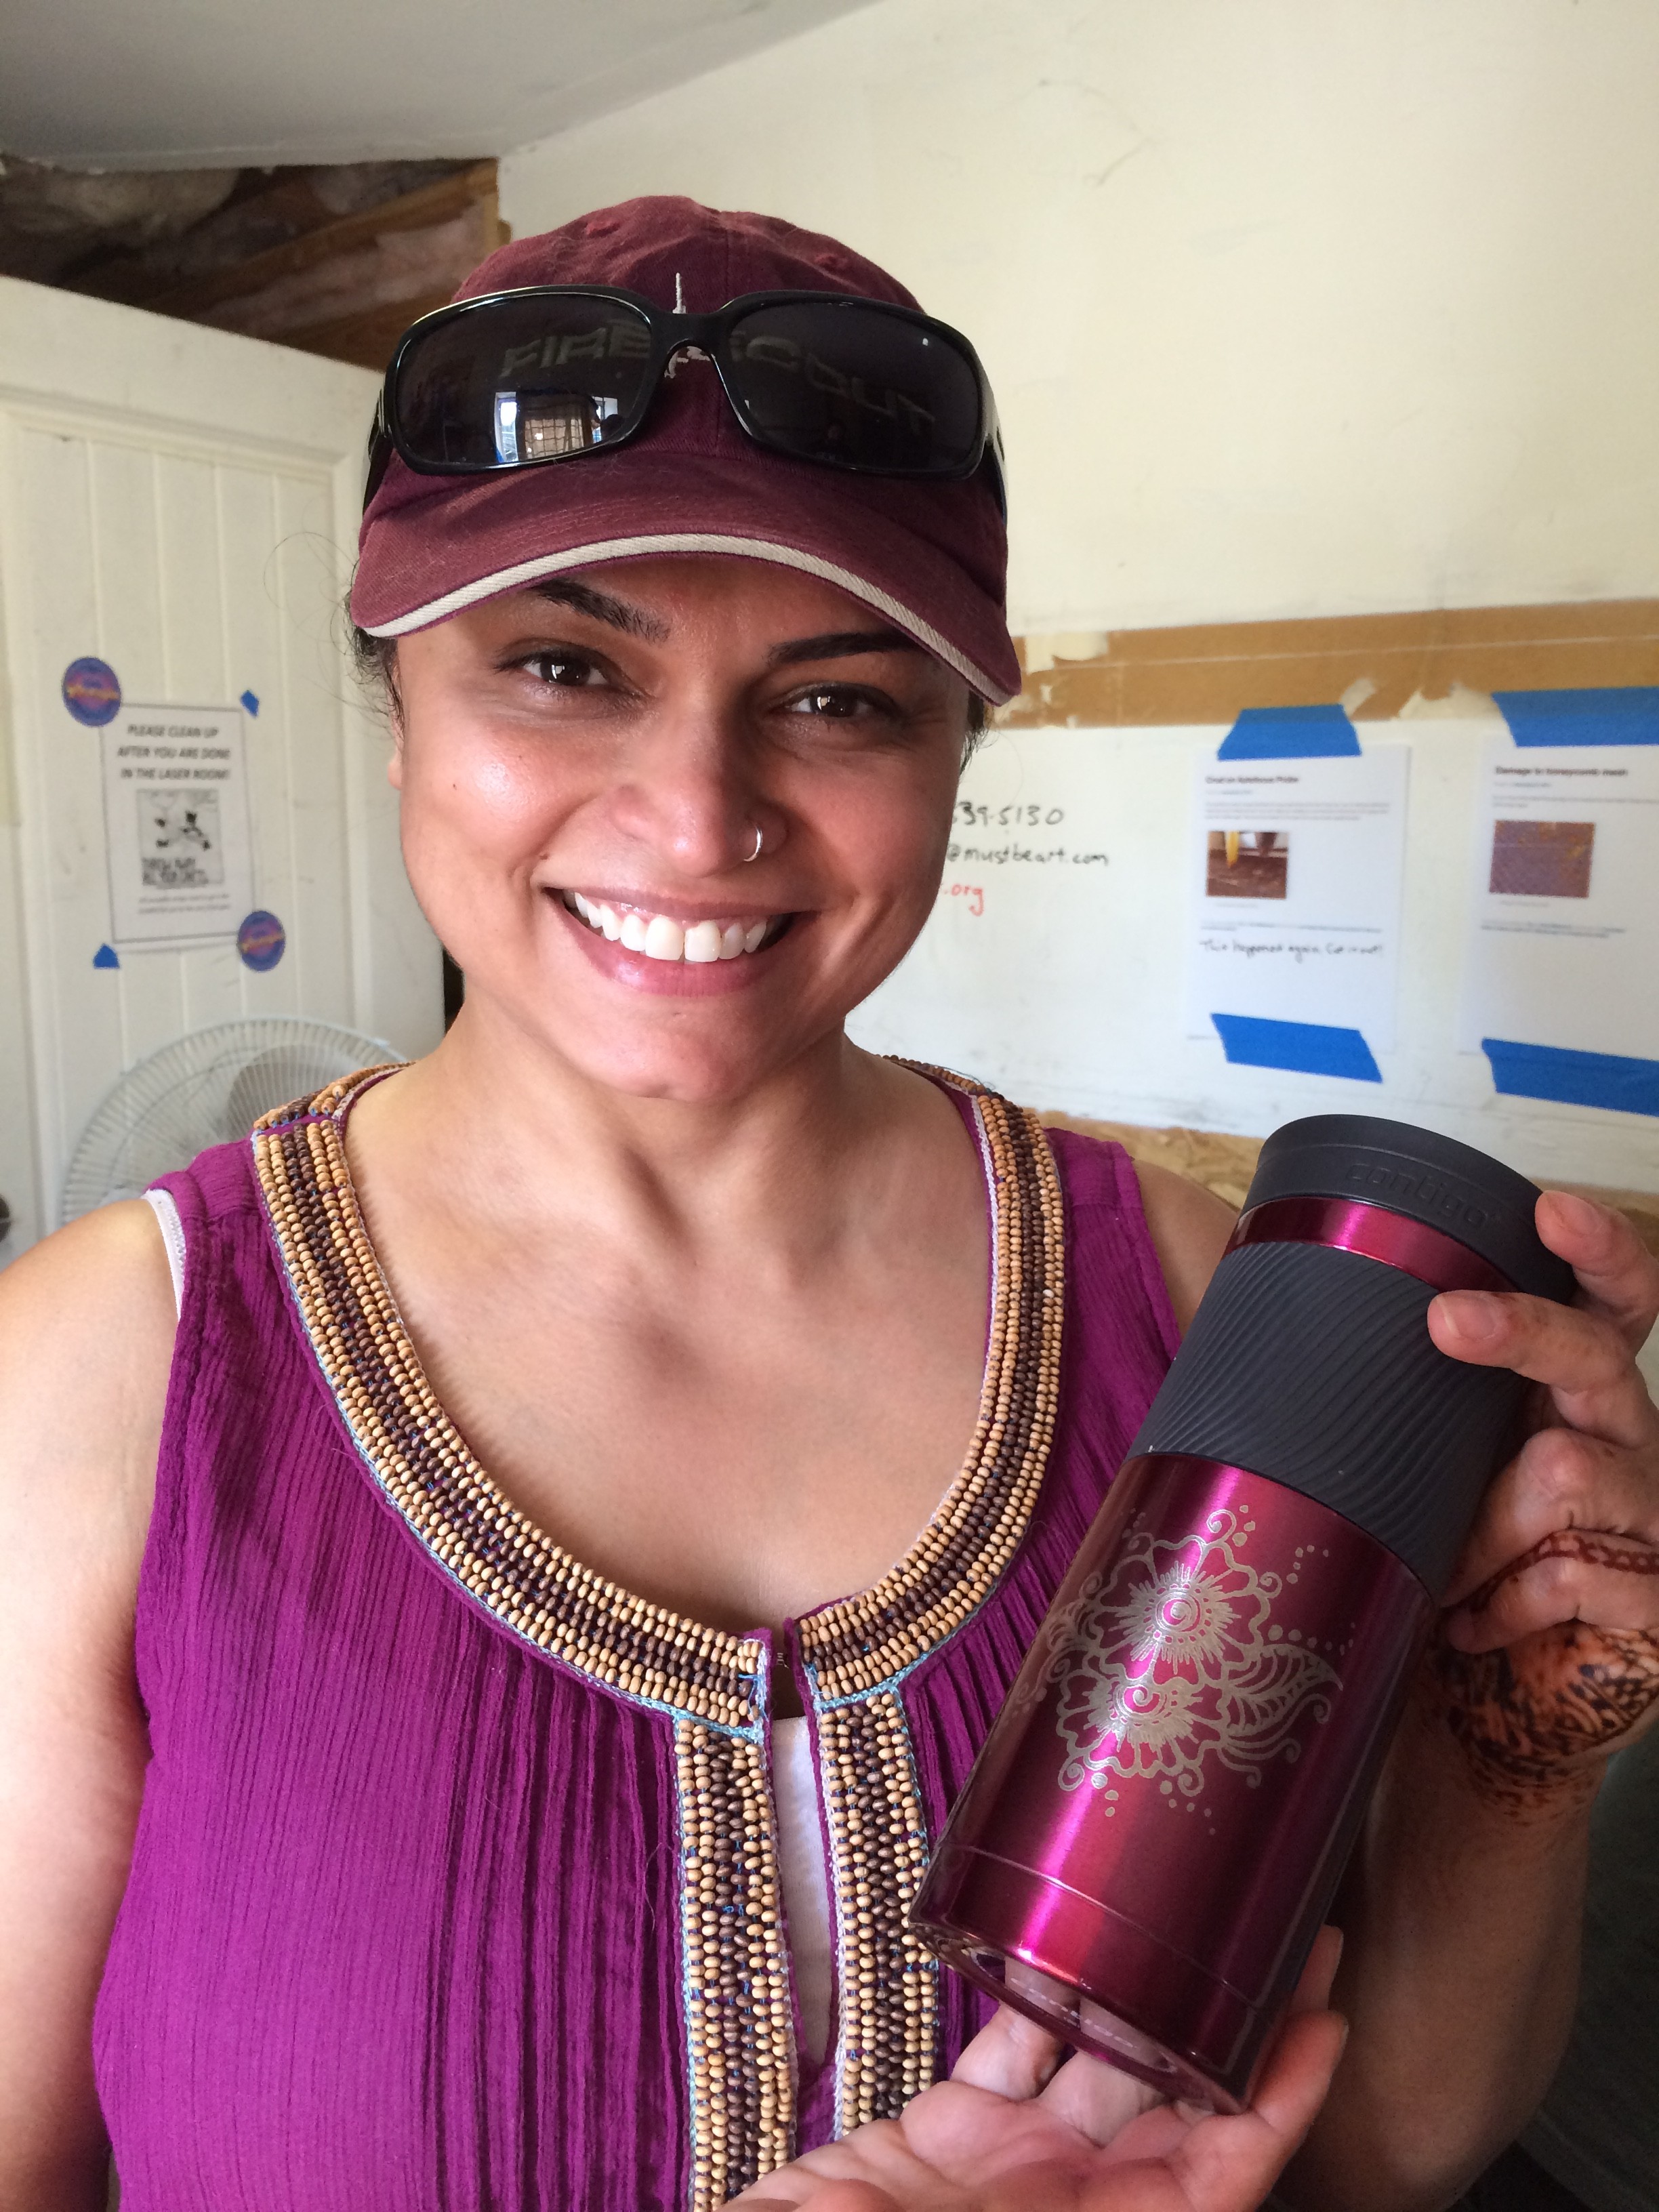 Sonie showing off her anodized aluminum water bottle with the henna pattern freshly engraved on the rotary adapter.